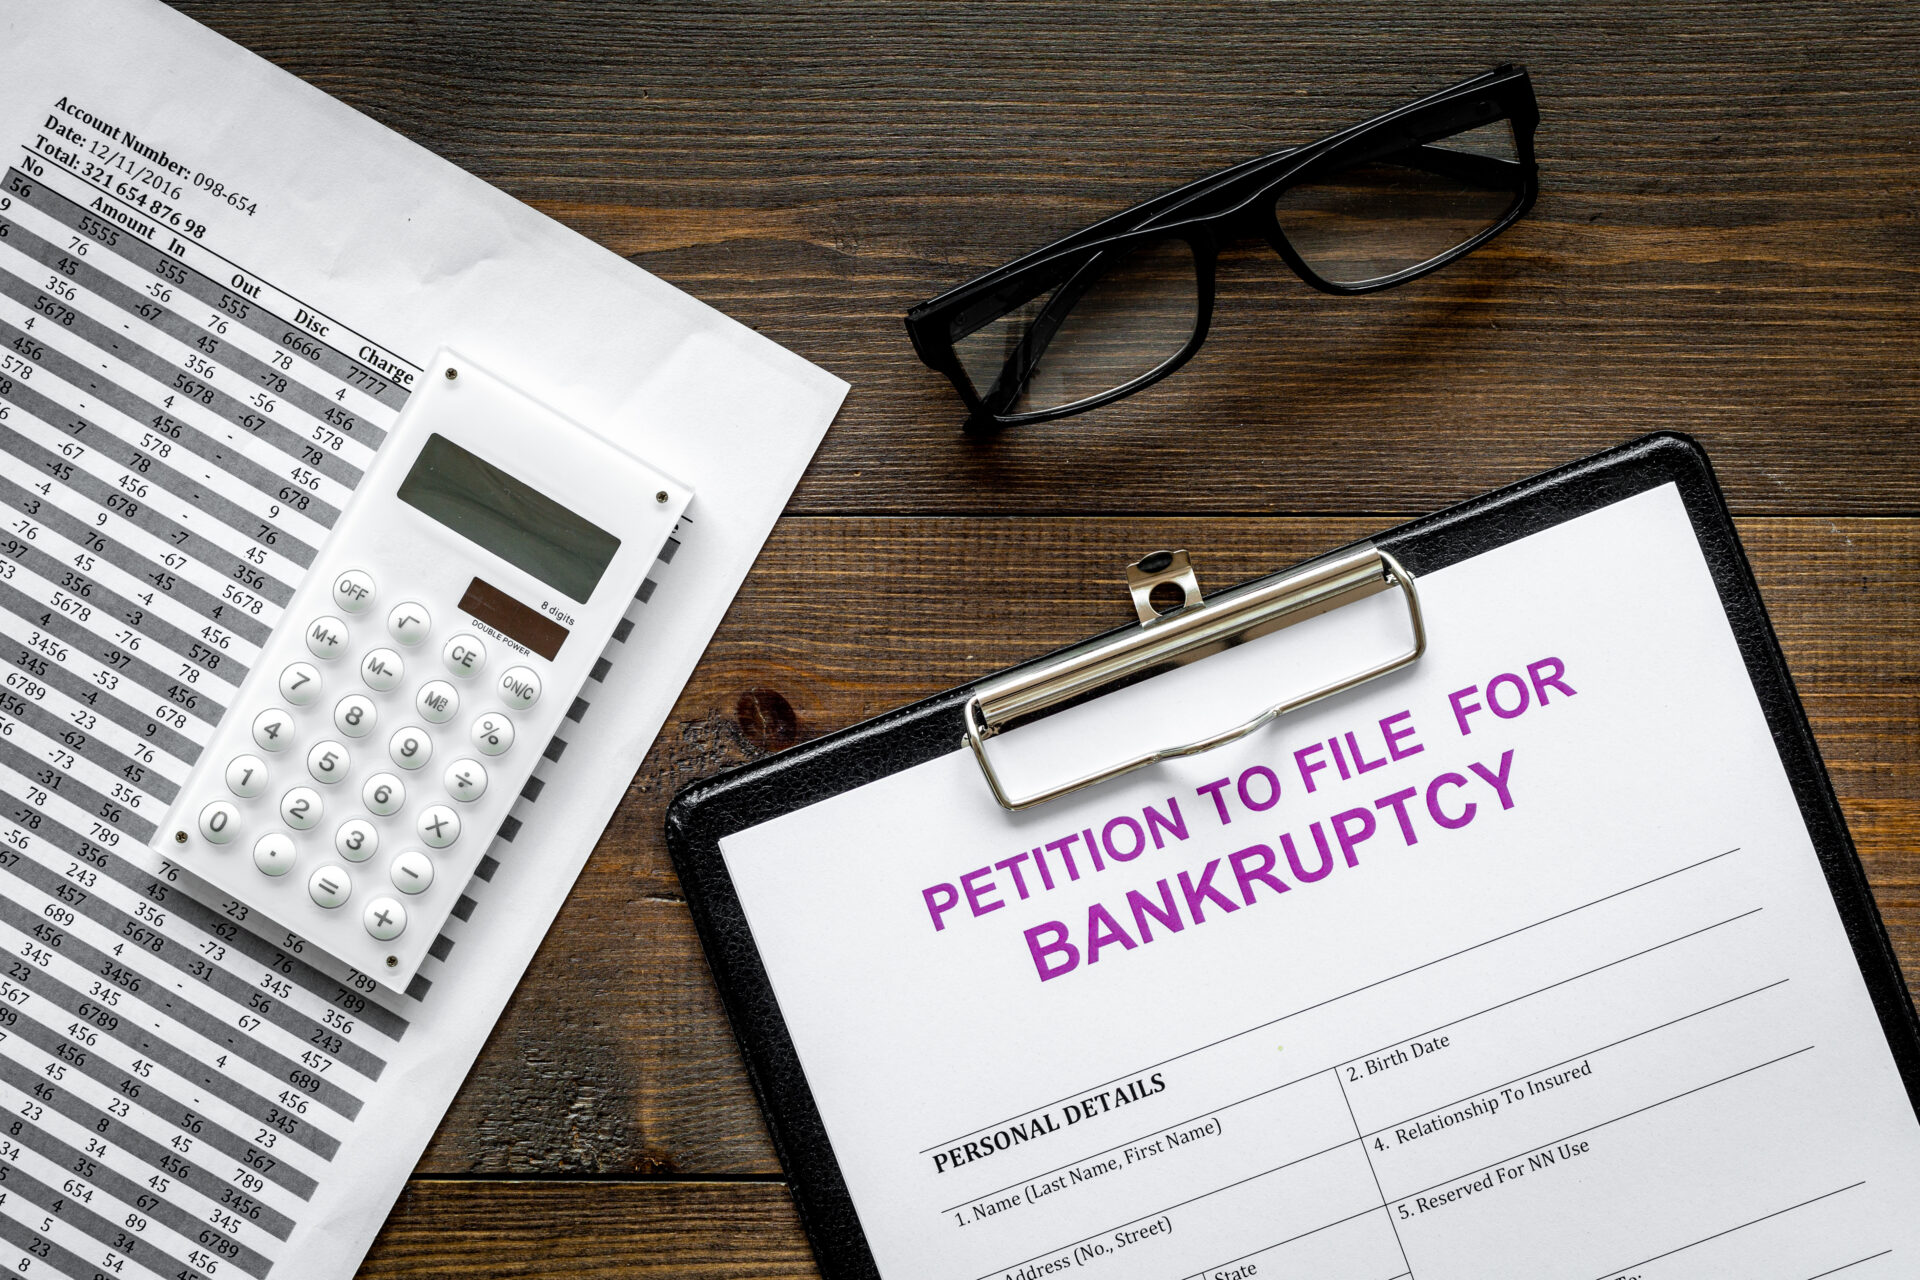 How to File for Bankruptcy in Arizona